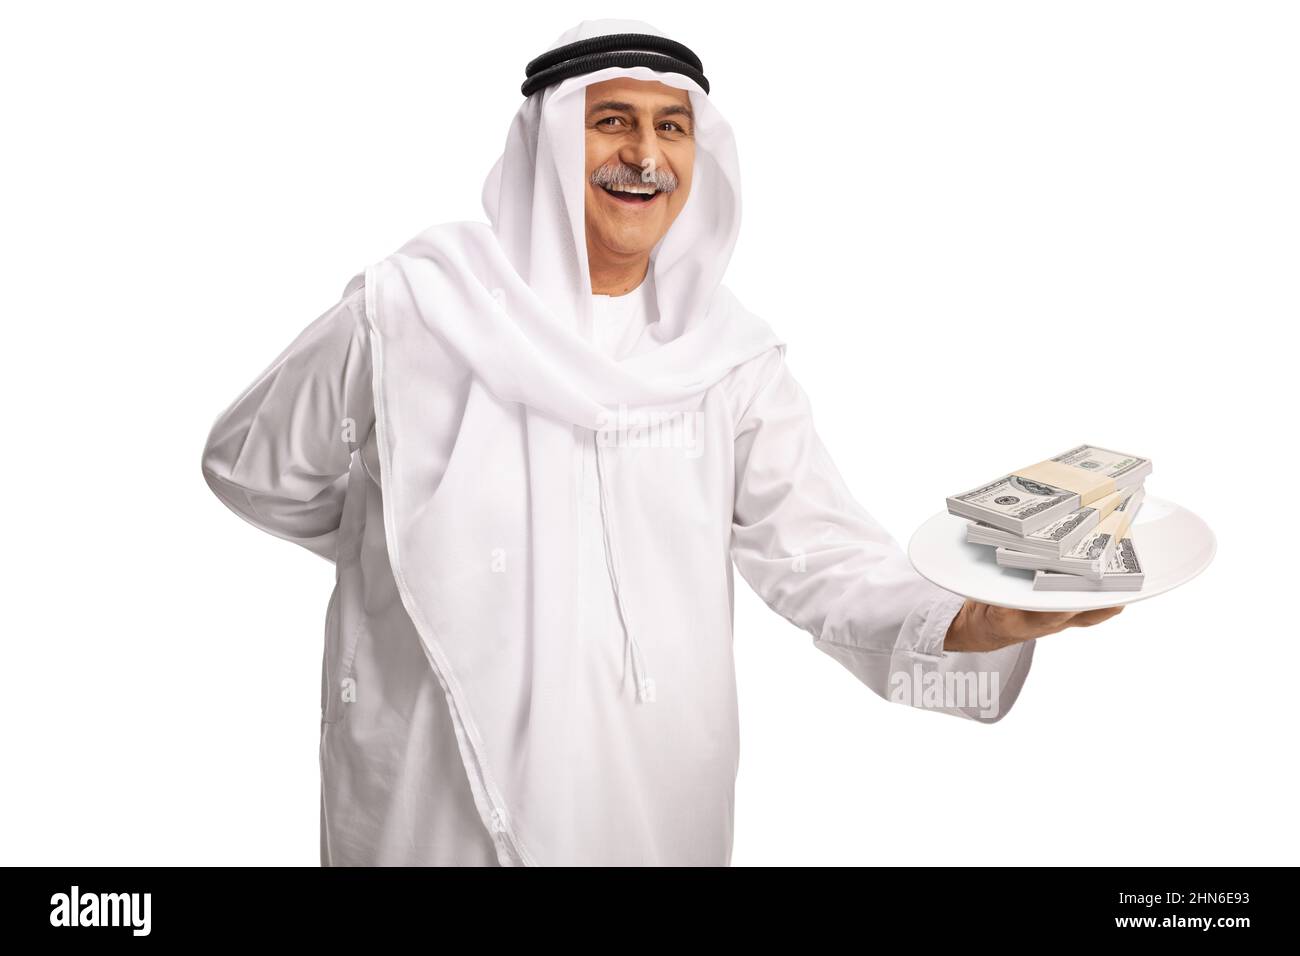 Mature arab man holding a plate with money isolated on white background Stock Photo